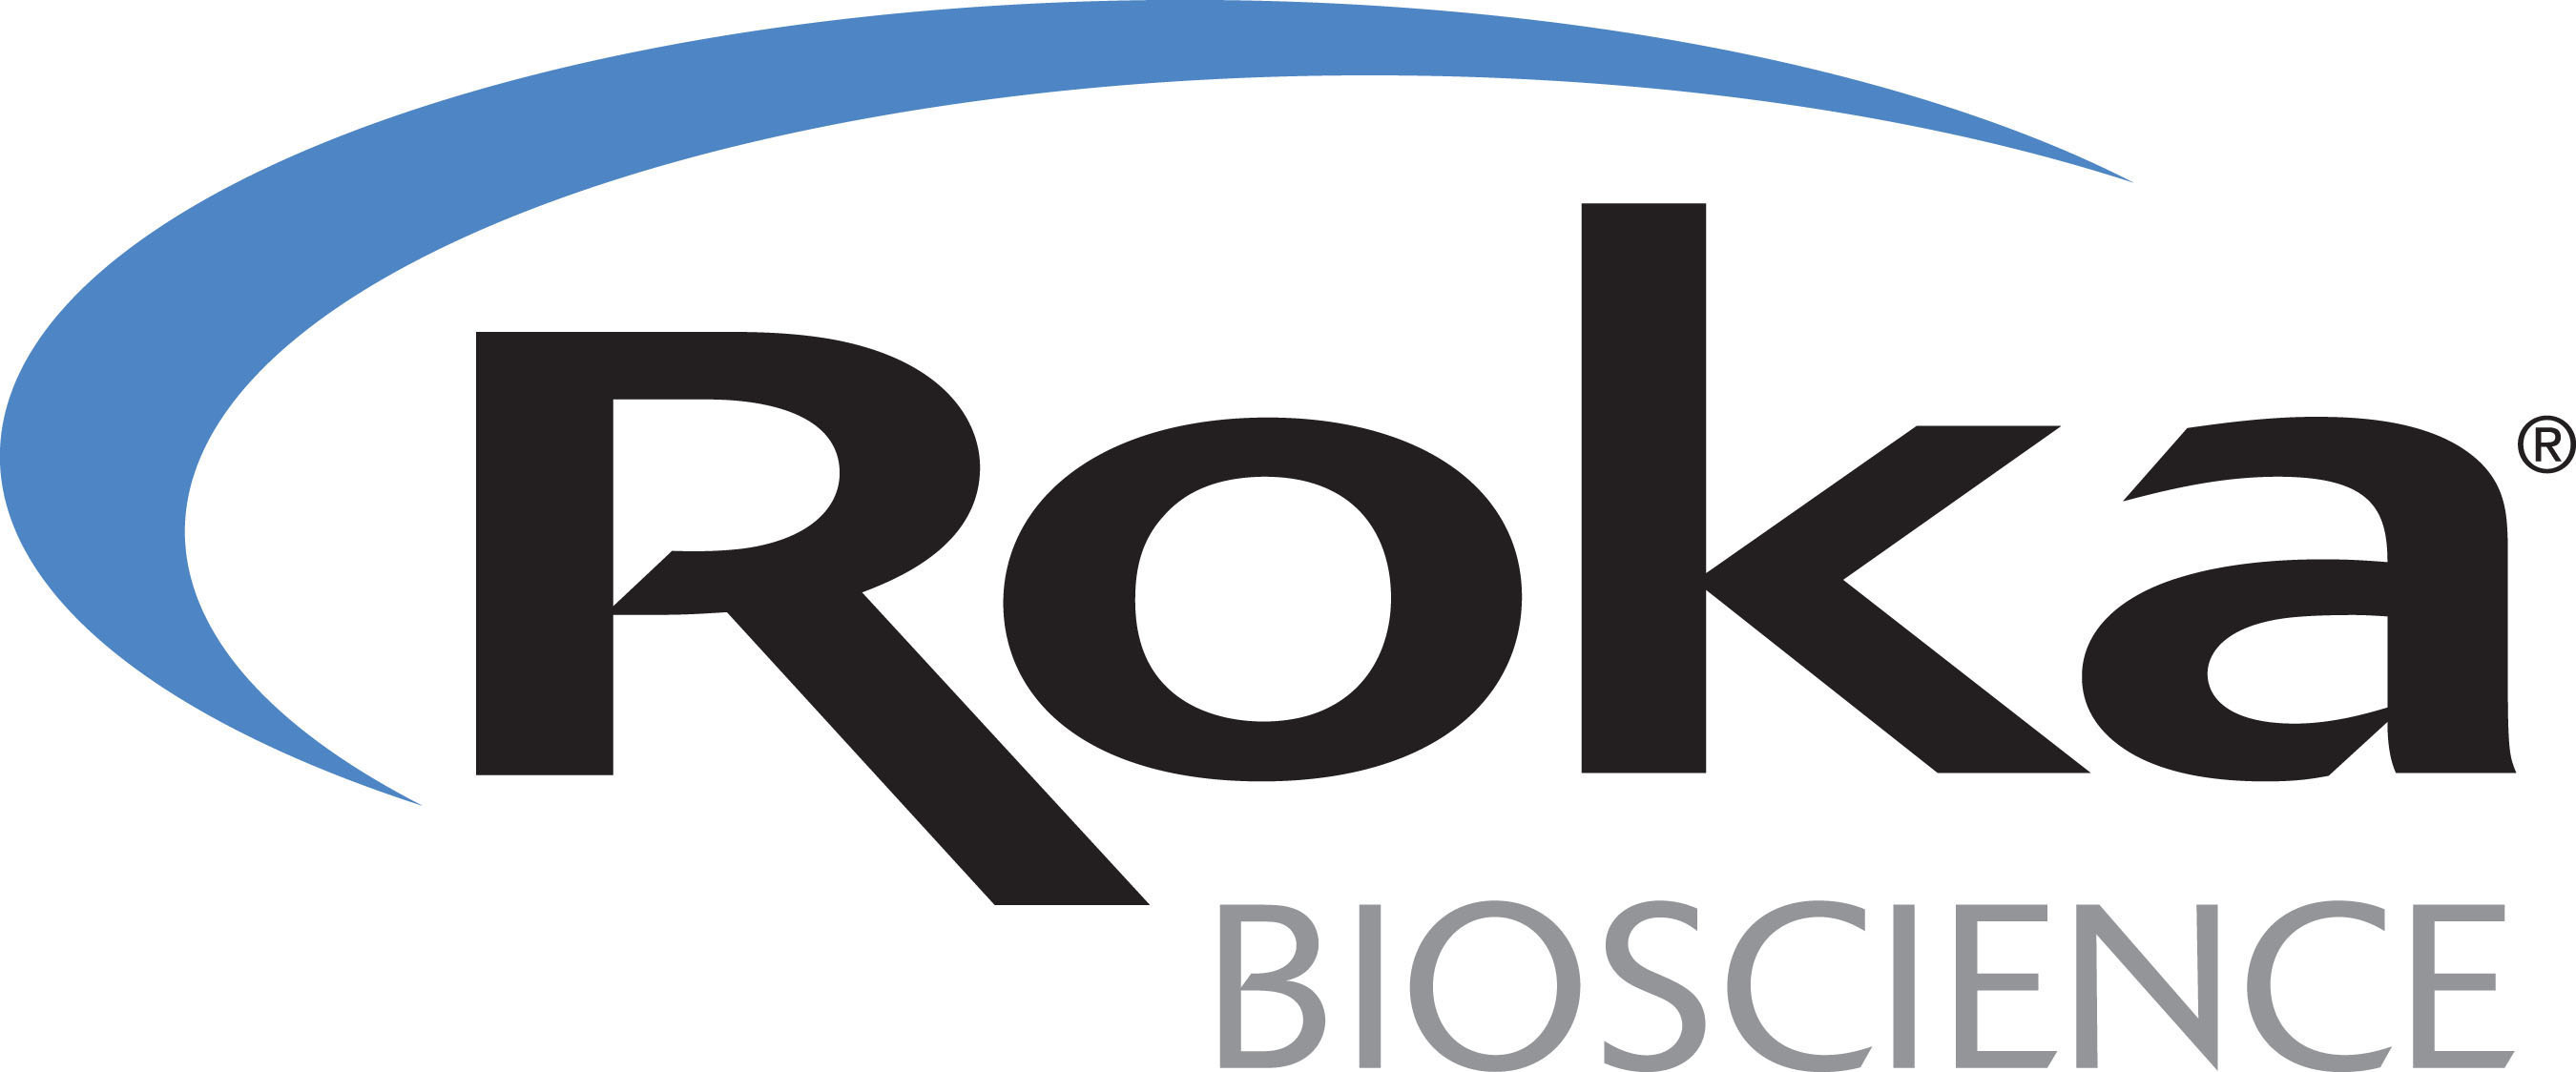 Roka delivers accurate and reliable test results for food pathogens regardless of sample type. You can be confident in the accuracy of your results, the efficiency of our automated system, and our commitment to you and the food safety industry.